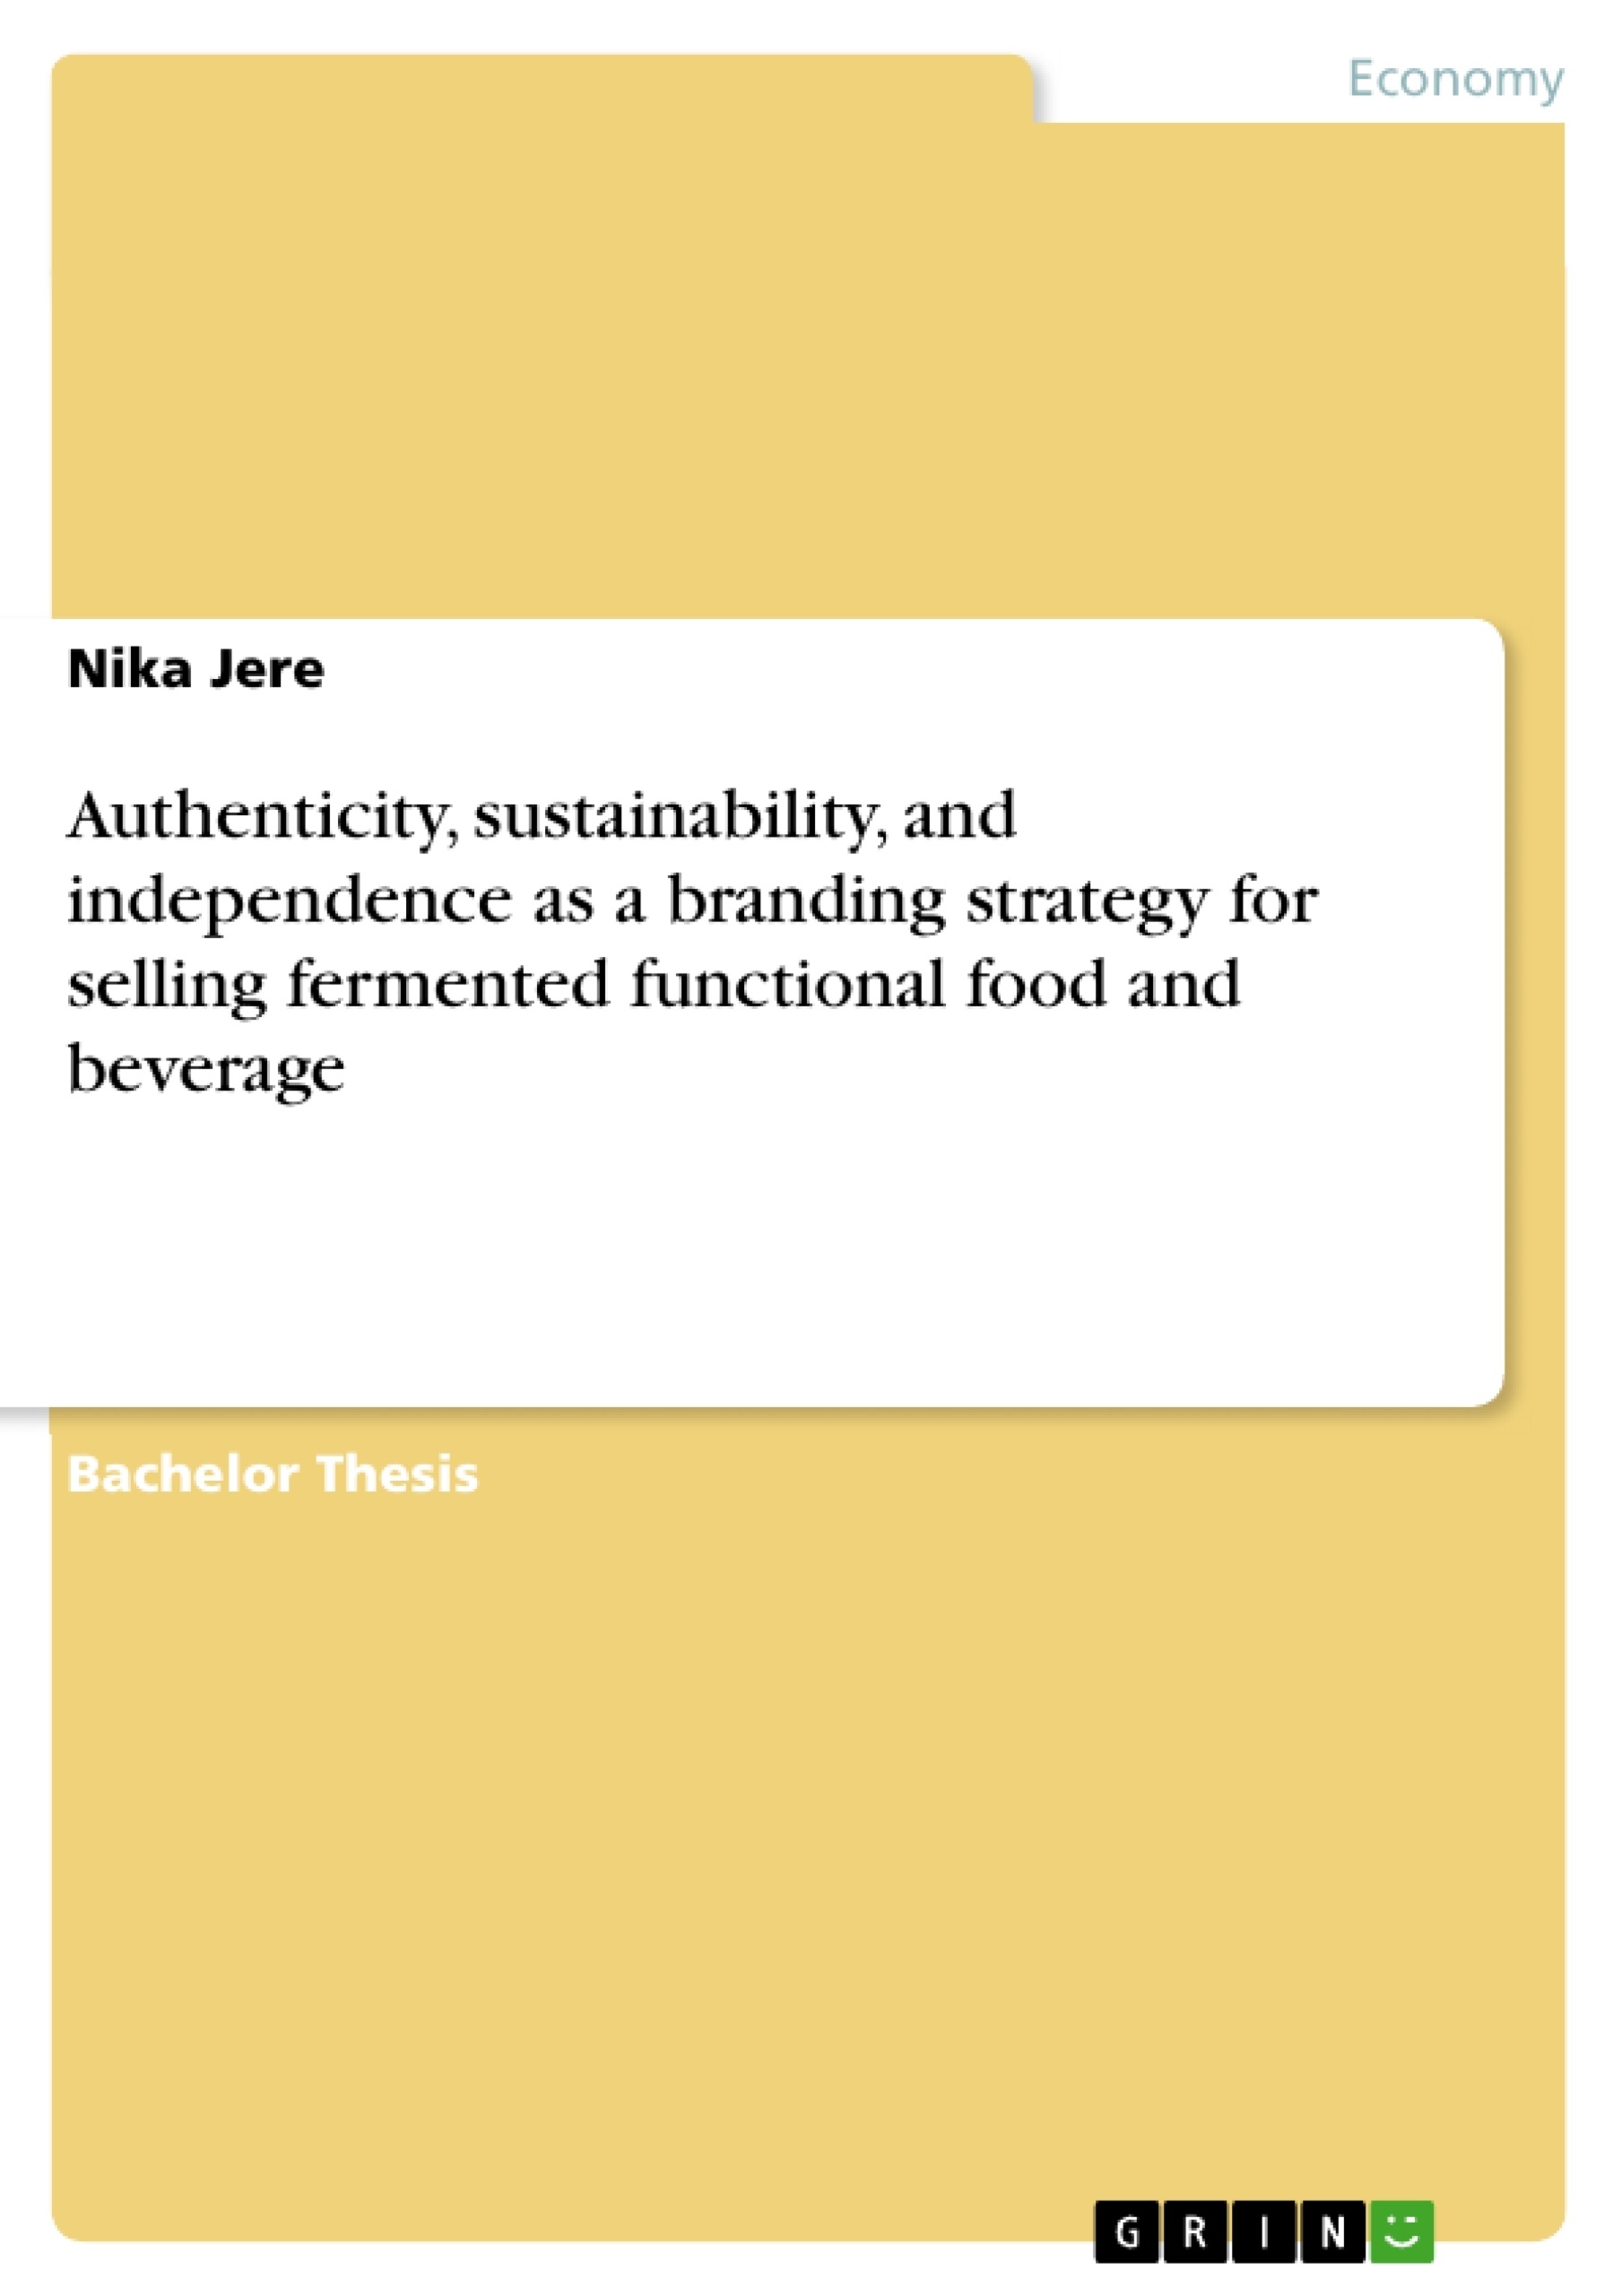 Title: Authenticity, sustainability, and independence as a branding strategy for selling fermented functional food and beverage